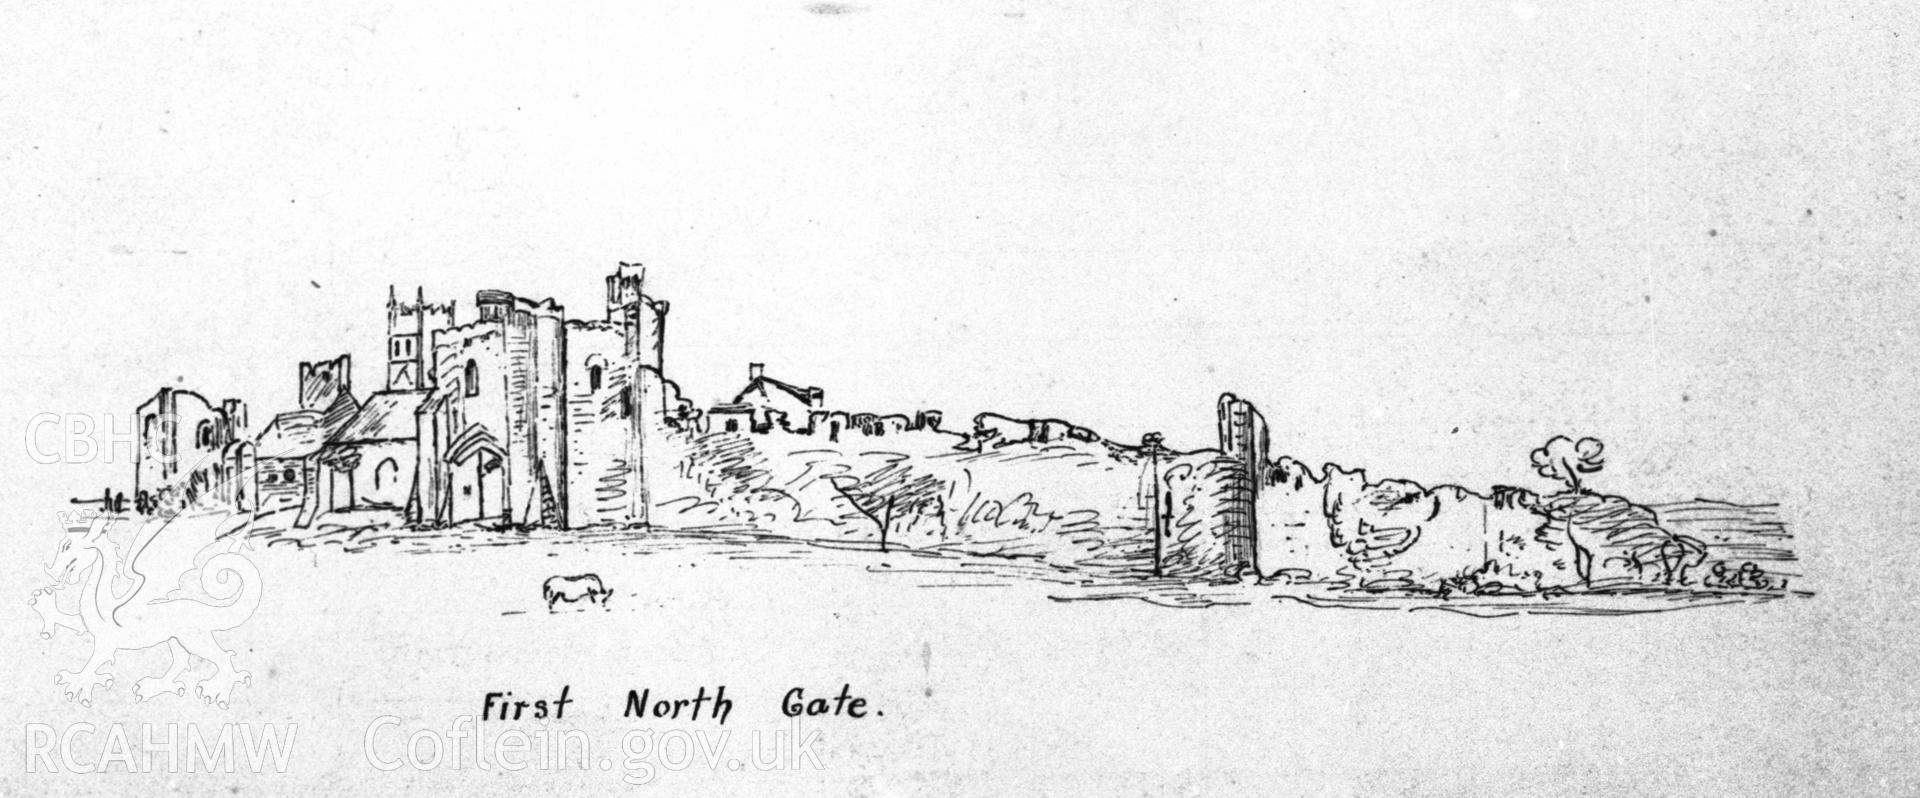 Sketch of Ewenny Priory, showing the first north gate, drawings in British Museum by architect J O S Richardson, copied from 1804 Carters.